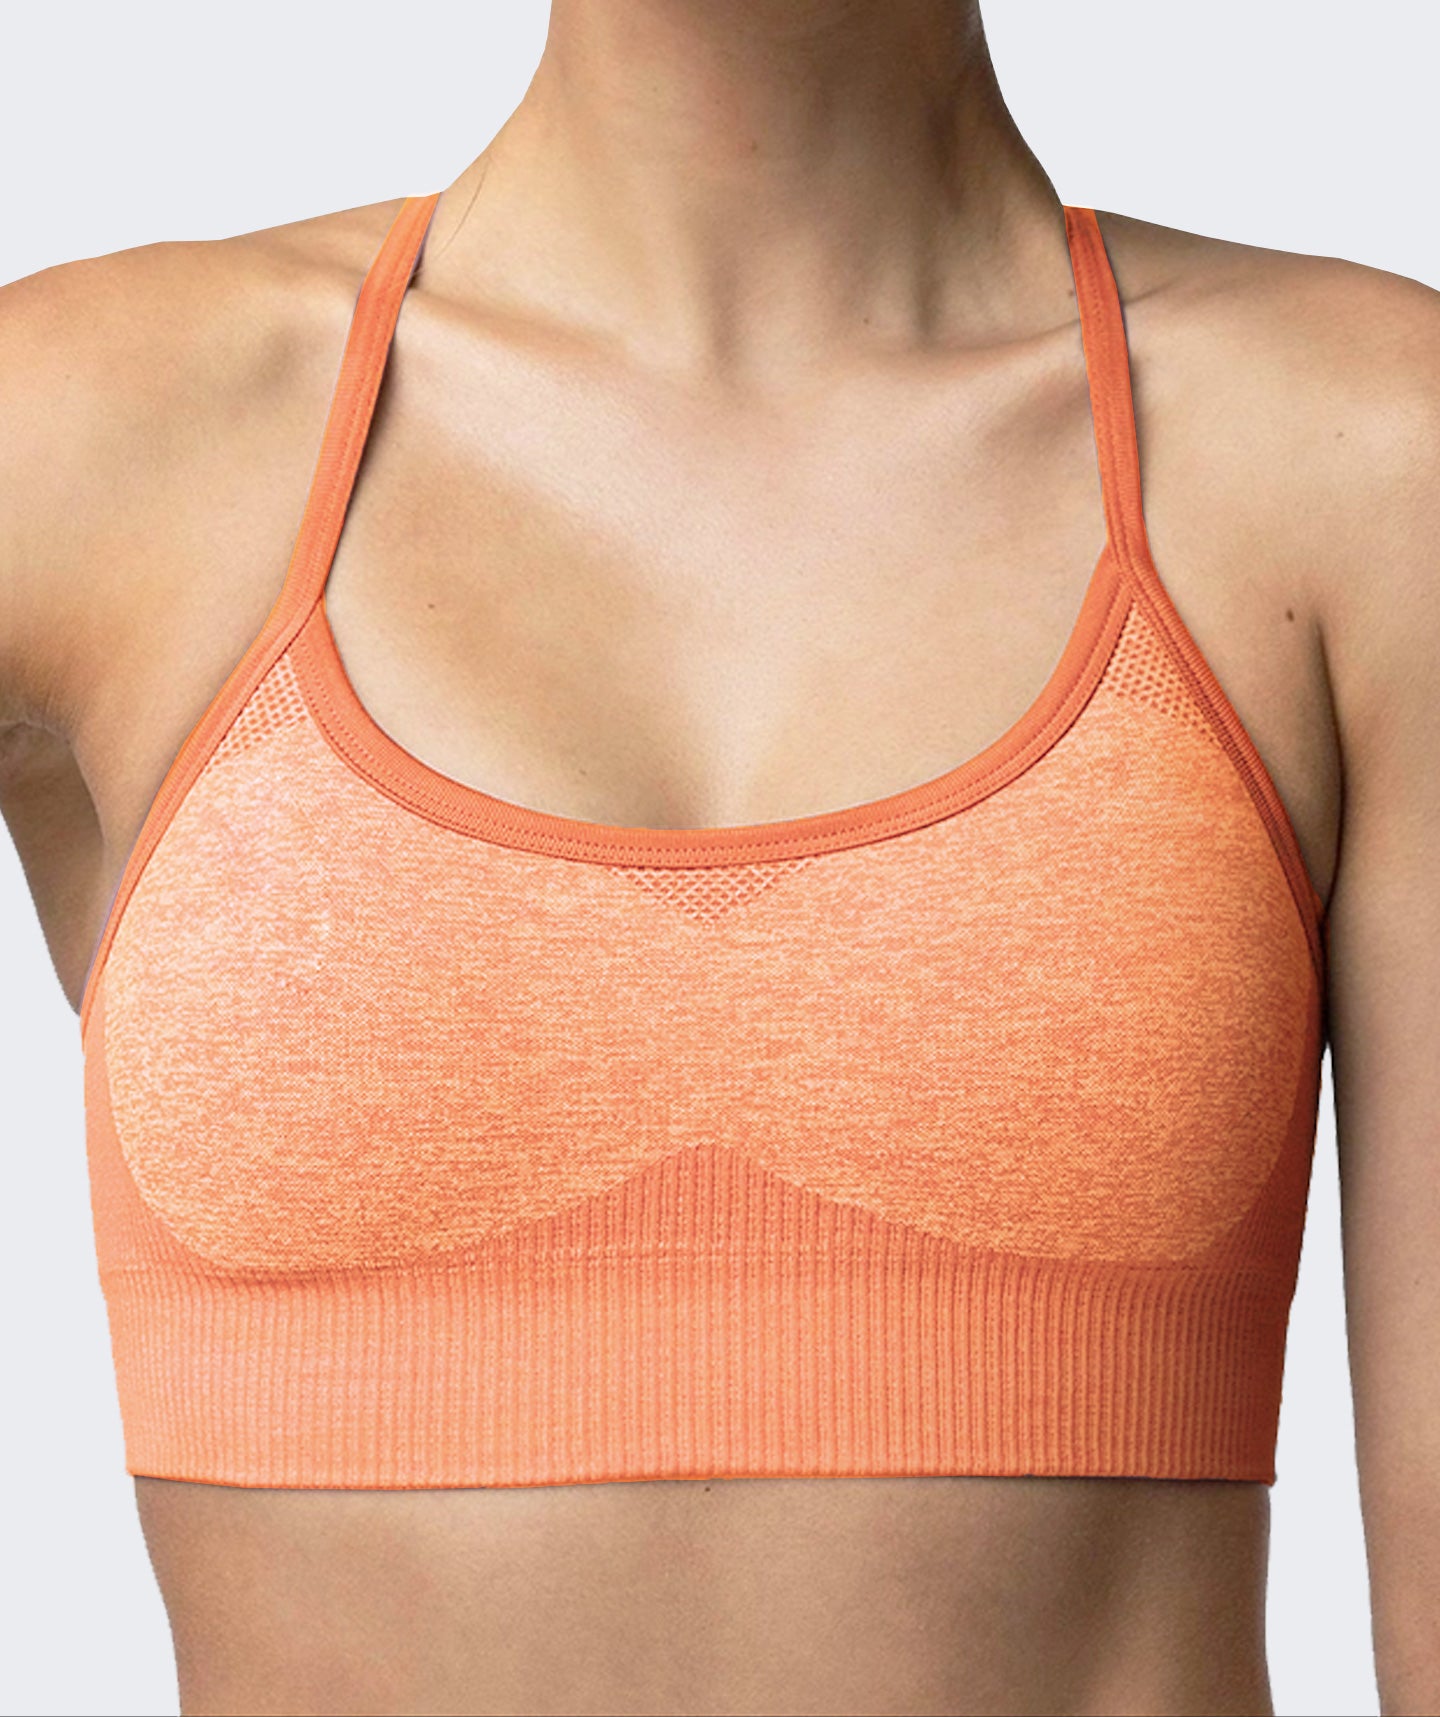 Flair Fitness Set with Cross Back Design Sports Bra and Adjustable Straps in Orange